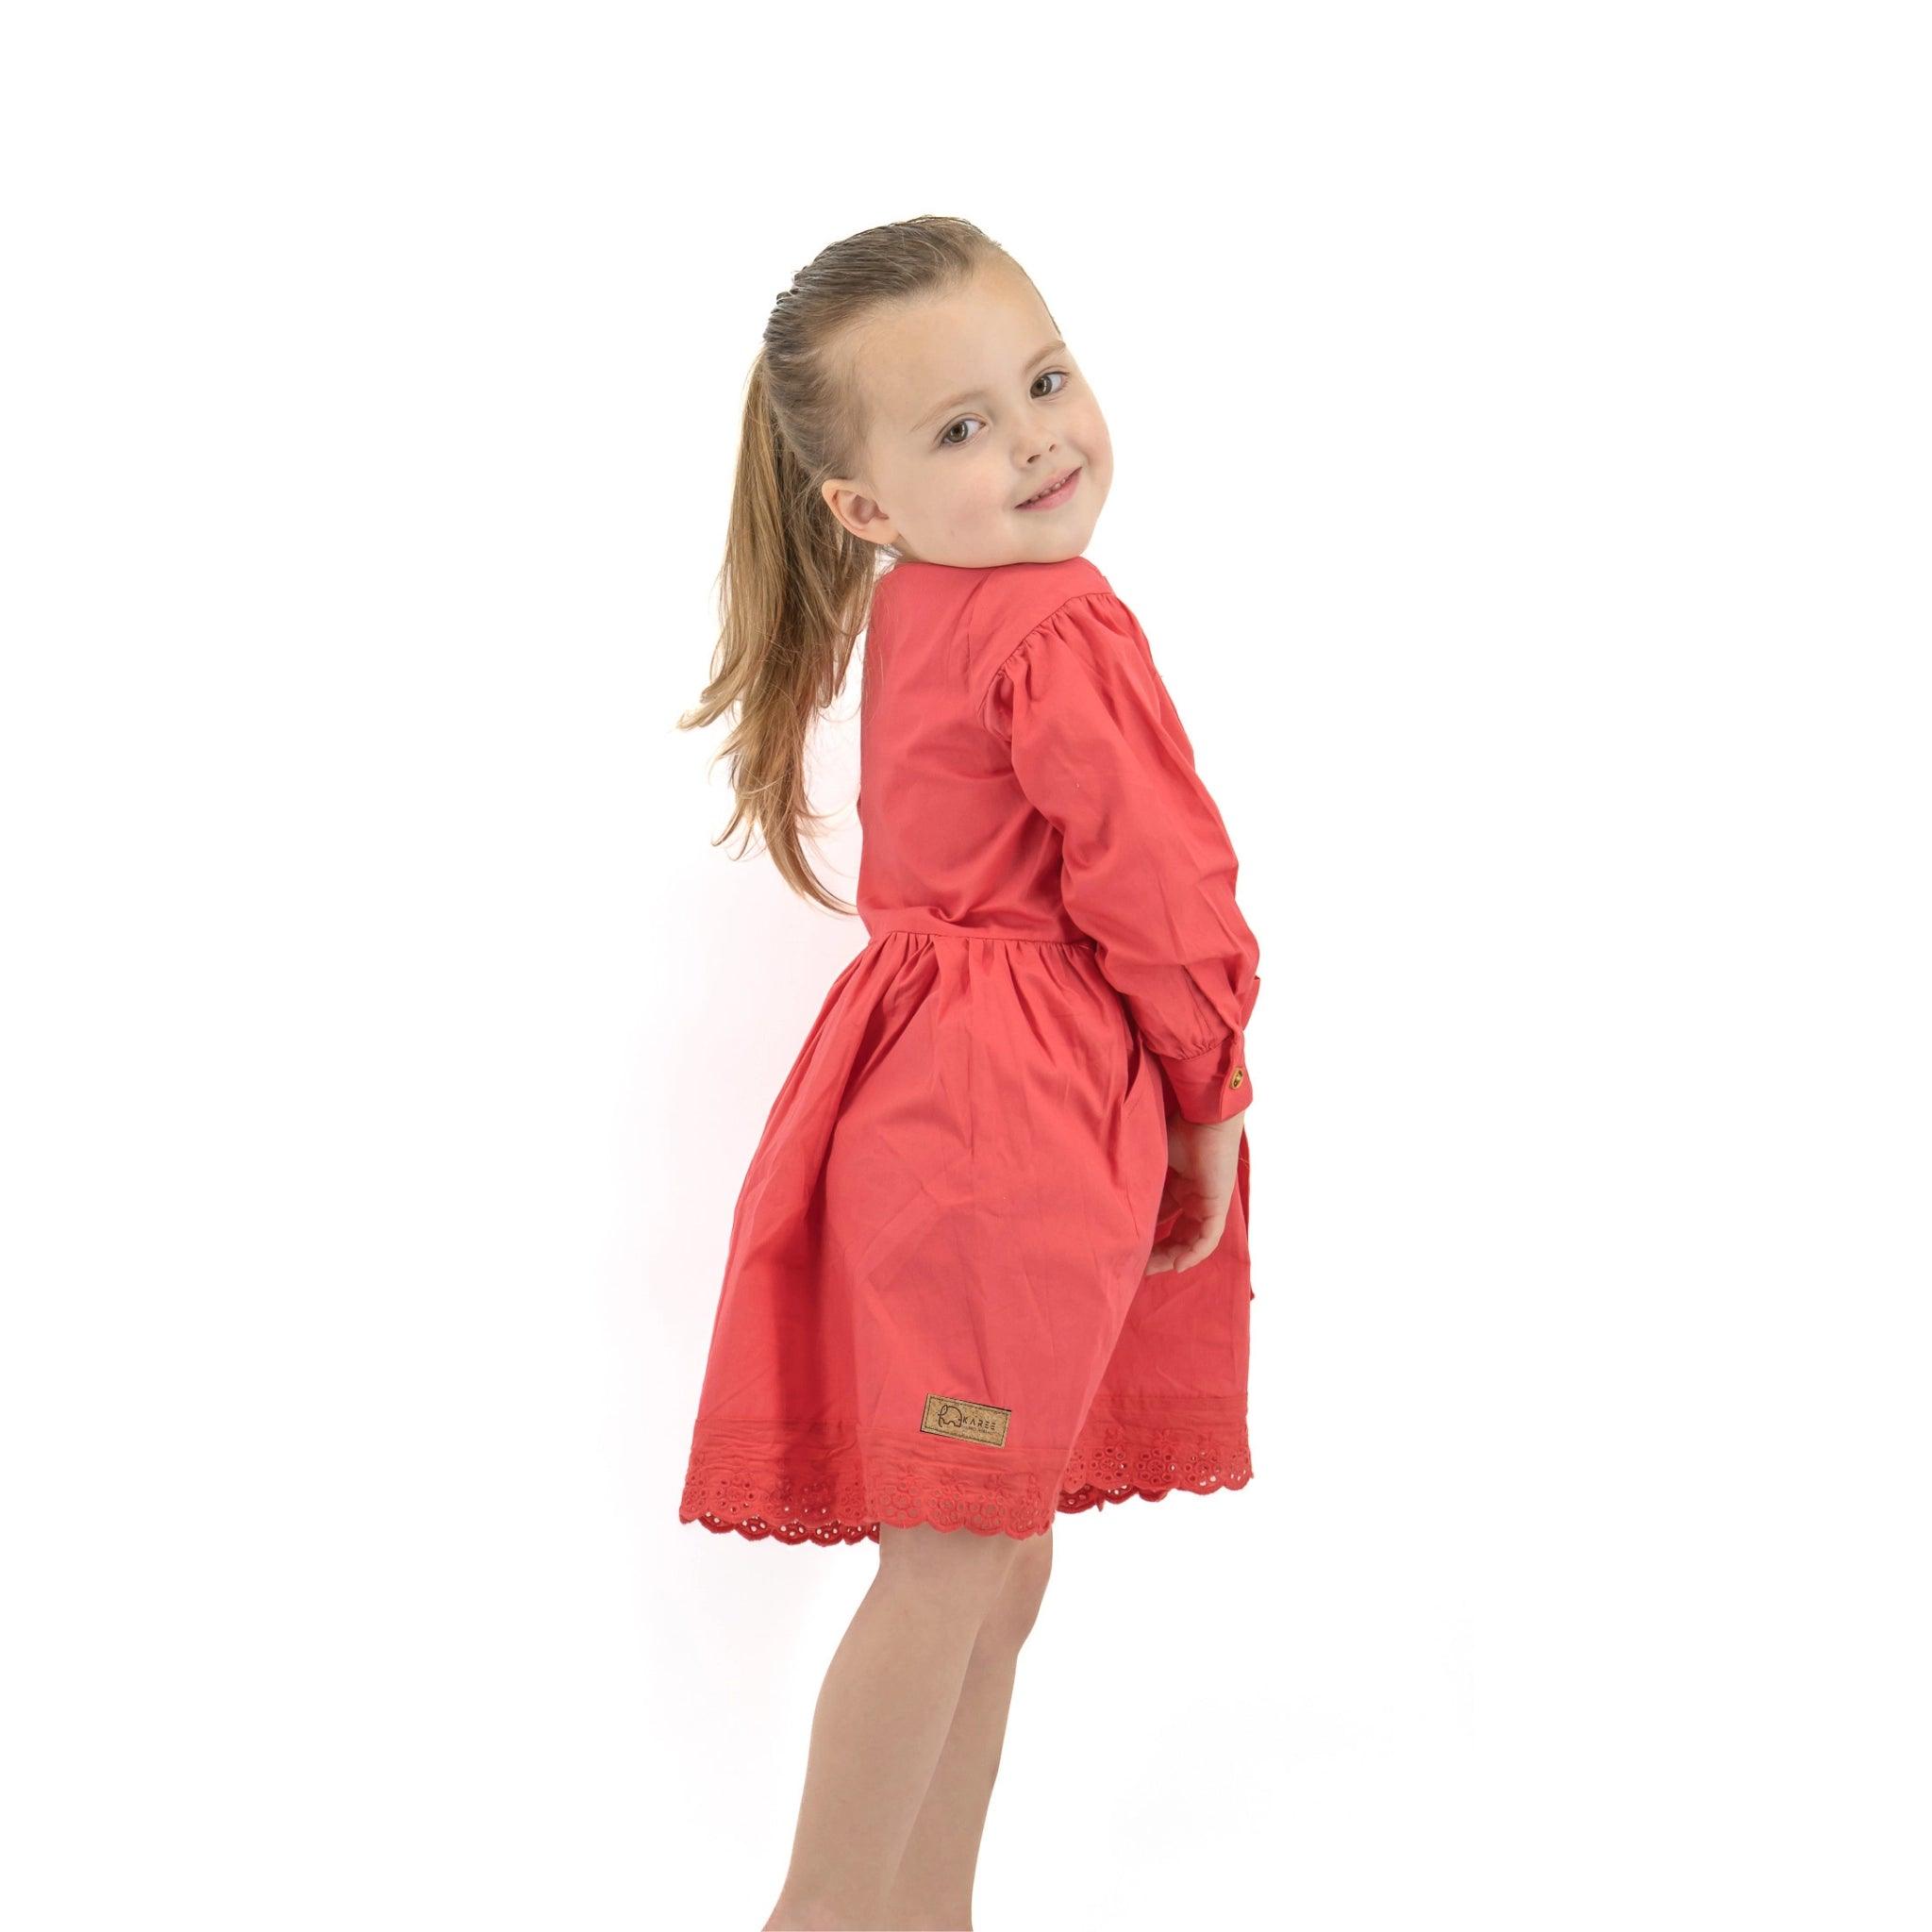 A young girl in a Karee red long puff sleeve cotton dress stands smiling, looking over her shoulder against a white background.